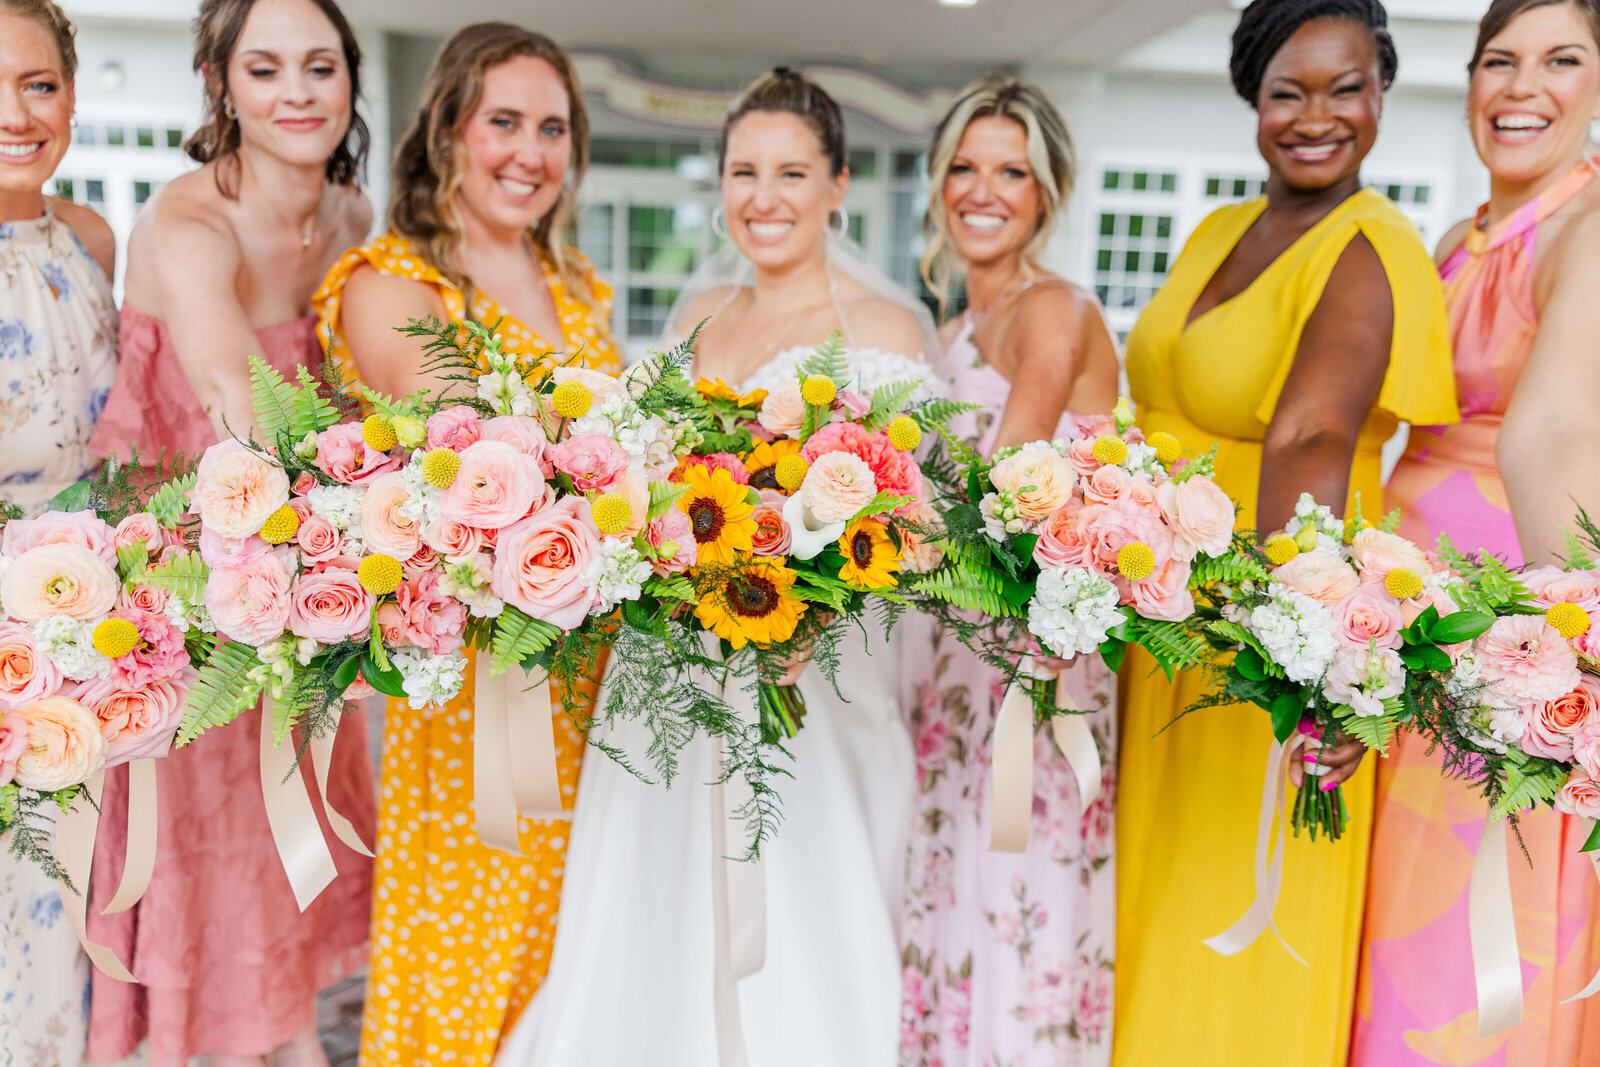 Bridesmaids in bright yellow and pink dresses hold up their bright bouquets with the bride. They are all smiling